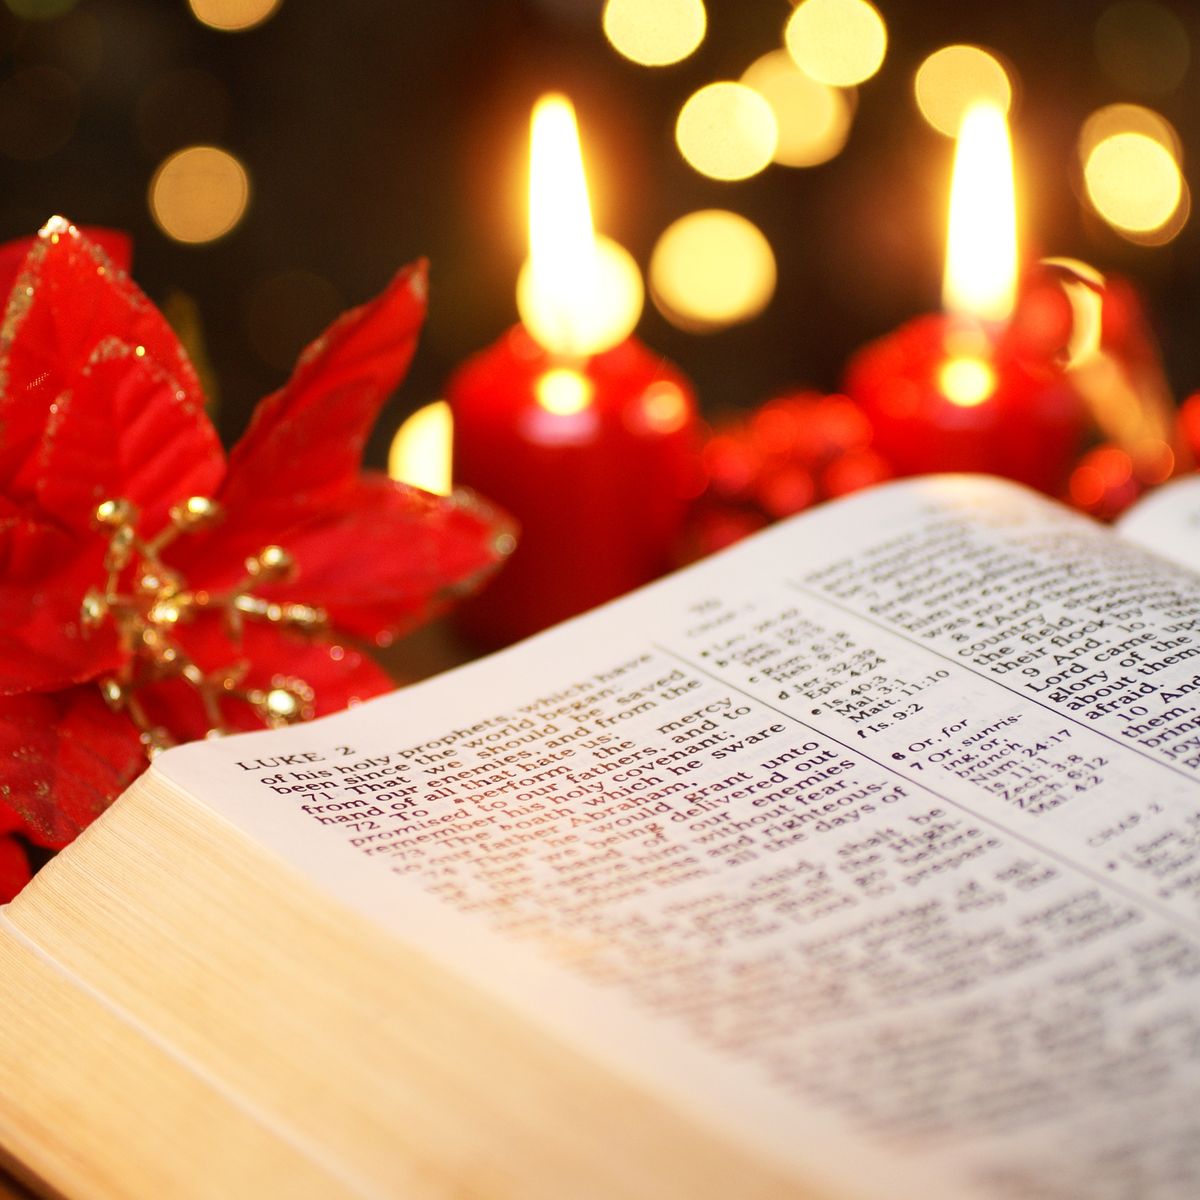 17 Ways Christians Can Give Back this Christmas